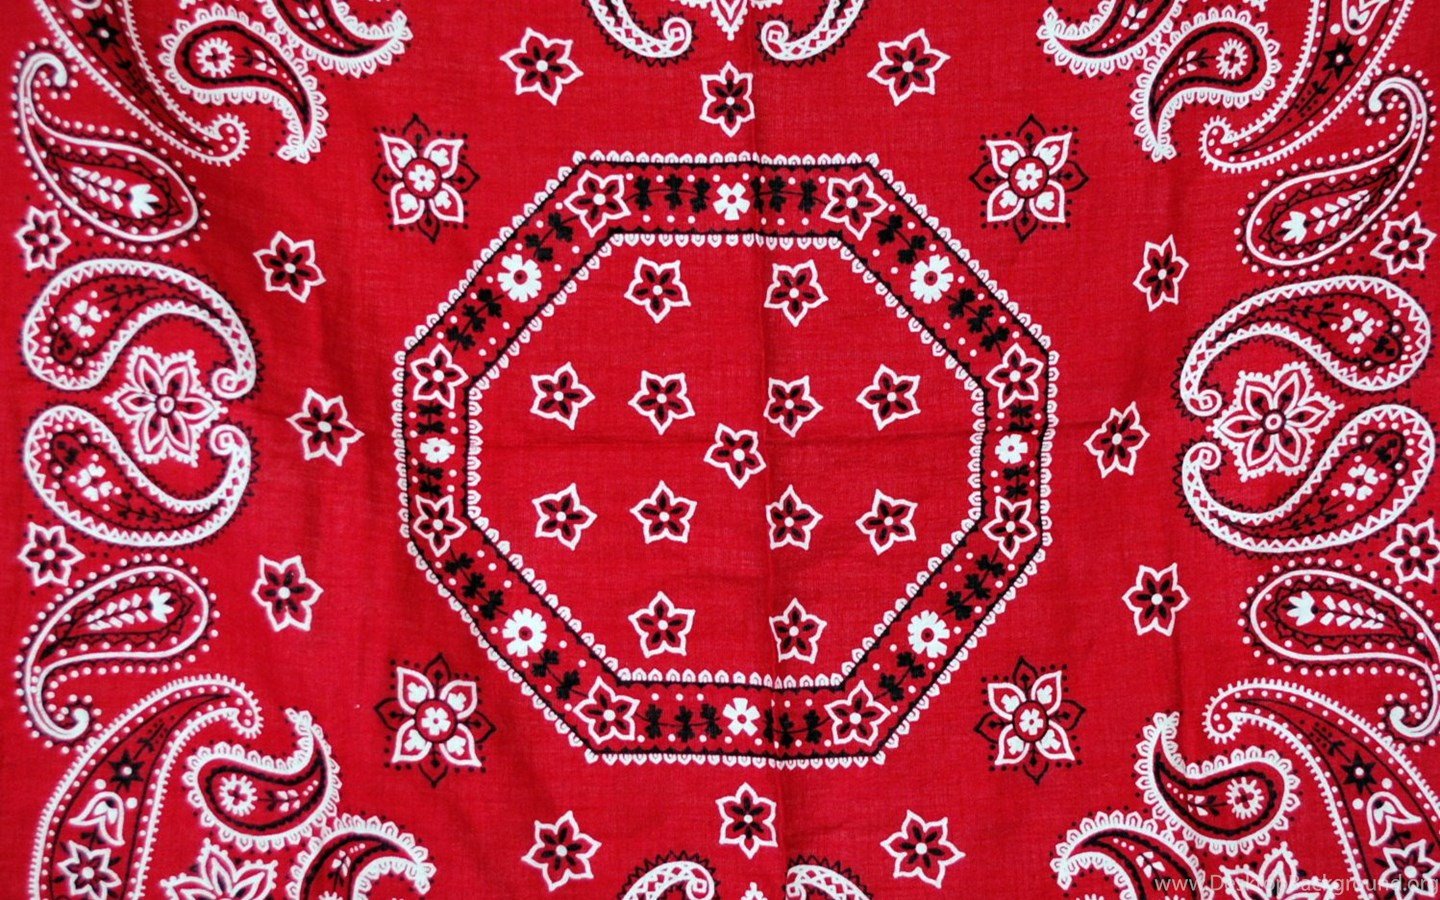 Red Bandana Wallpapers HD Wallpapers And Pictures Desktop Backgrounds.